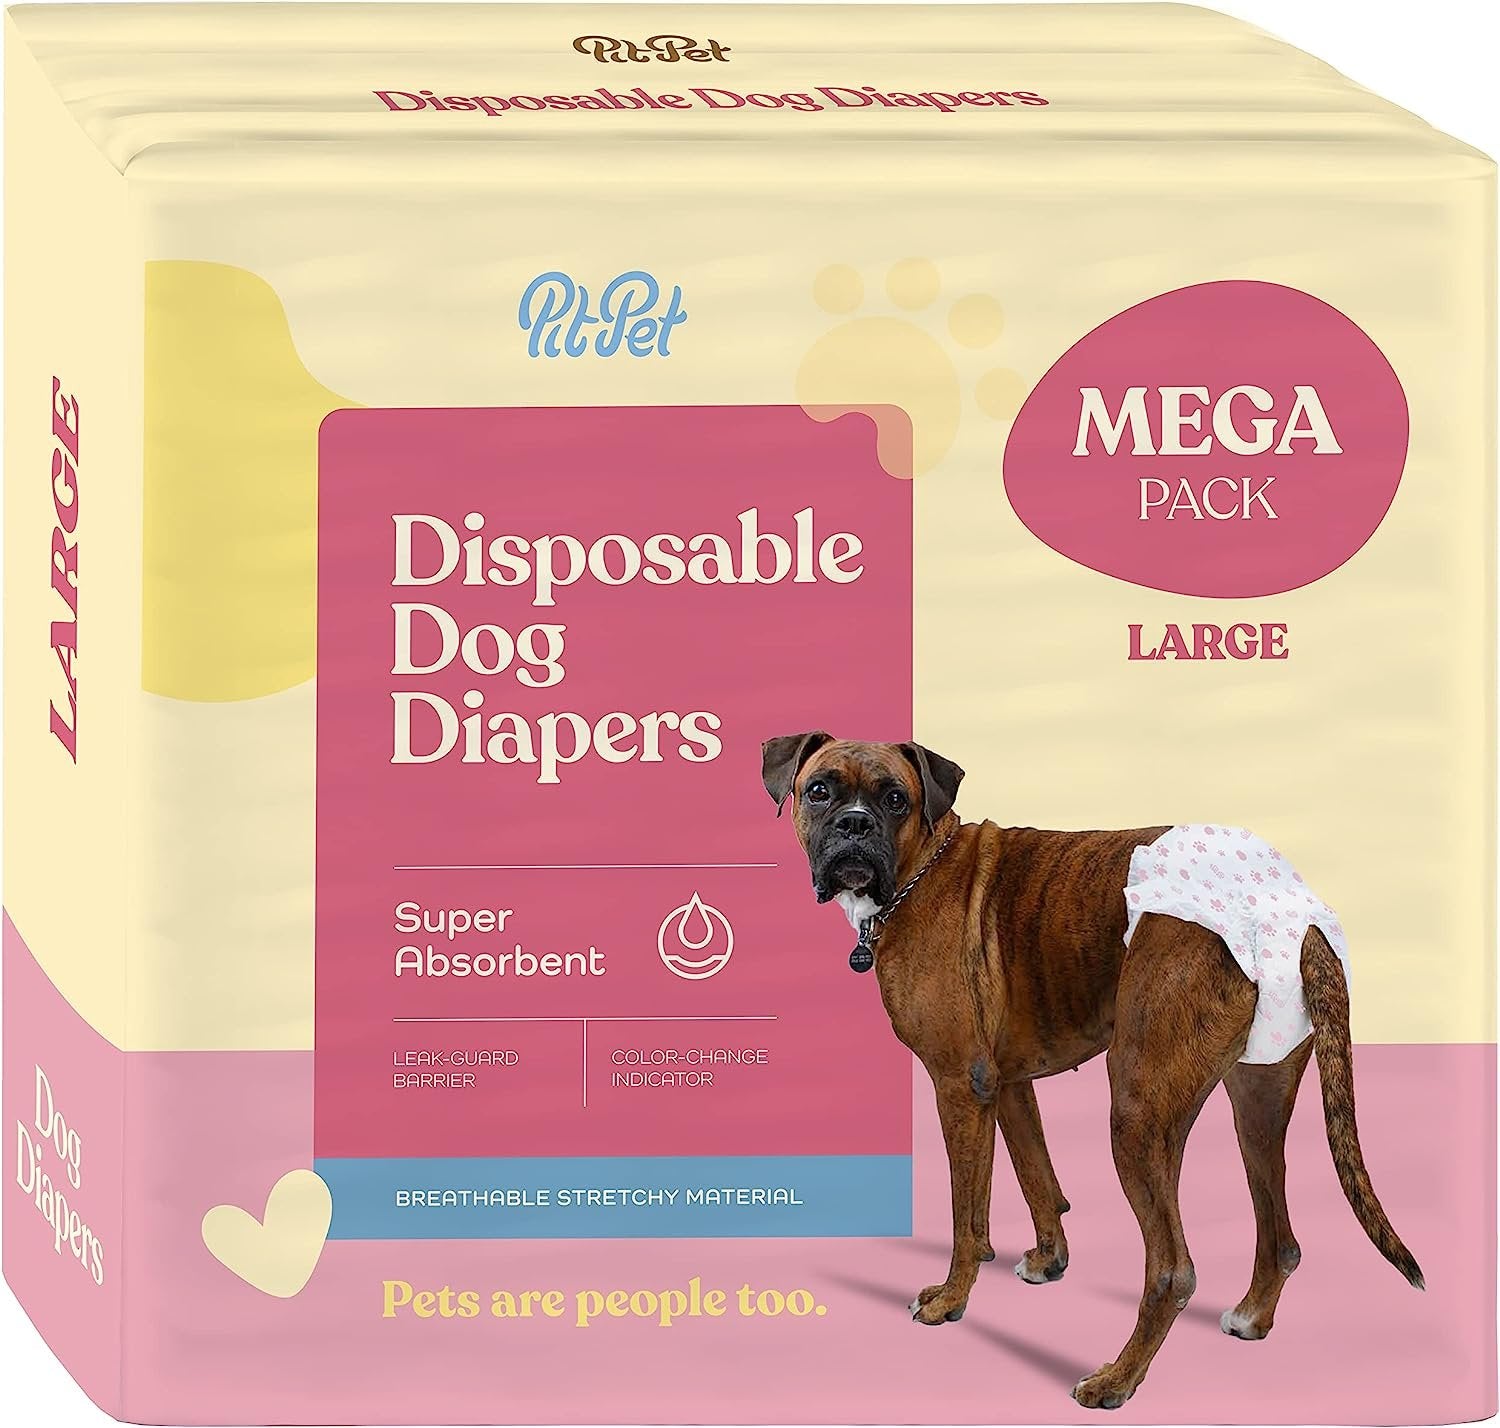 Comfortable Female Dog Diapers - 24-Pack Super Absorbent Disposable Doggie Diapers - FlashDry Gel Technology & Wetness Indicator - Leakproof Diapers for Dogs in Heat, Excitable Urination, Incontinence